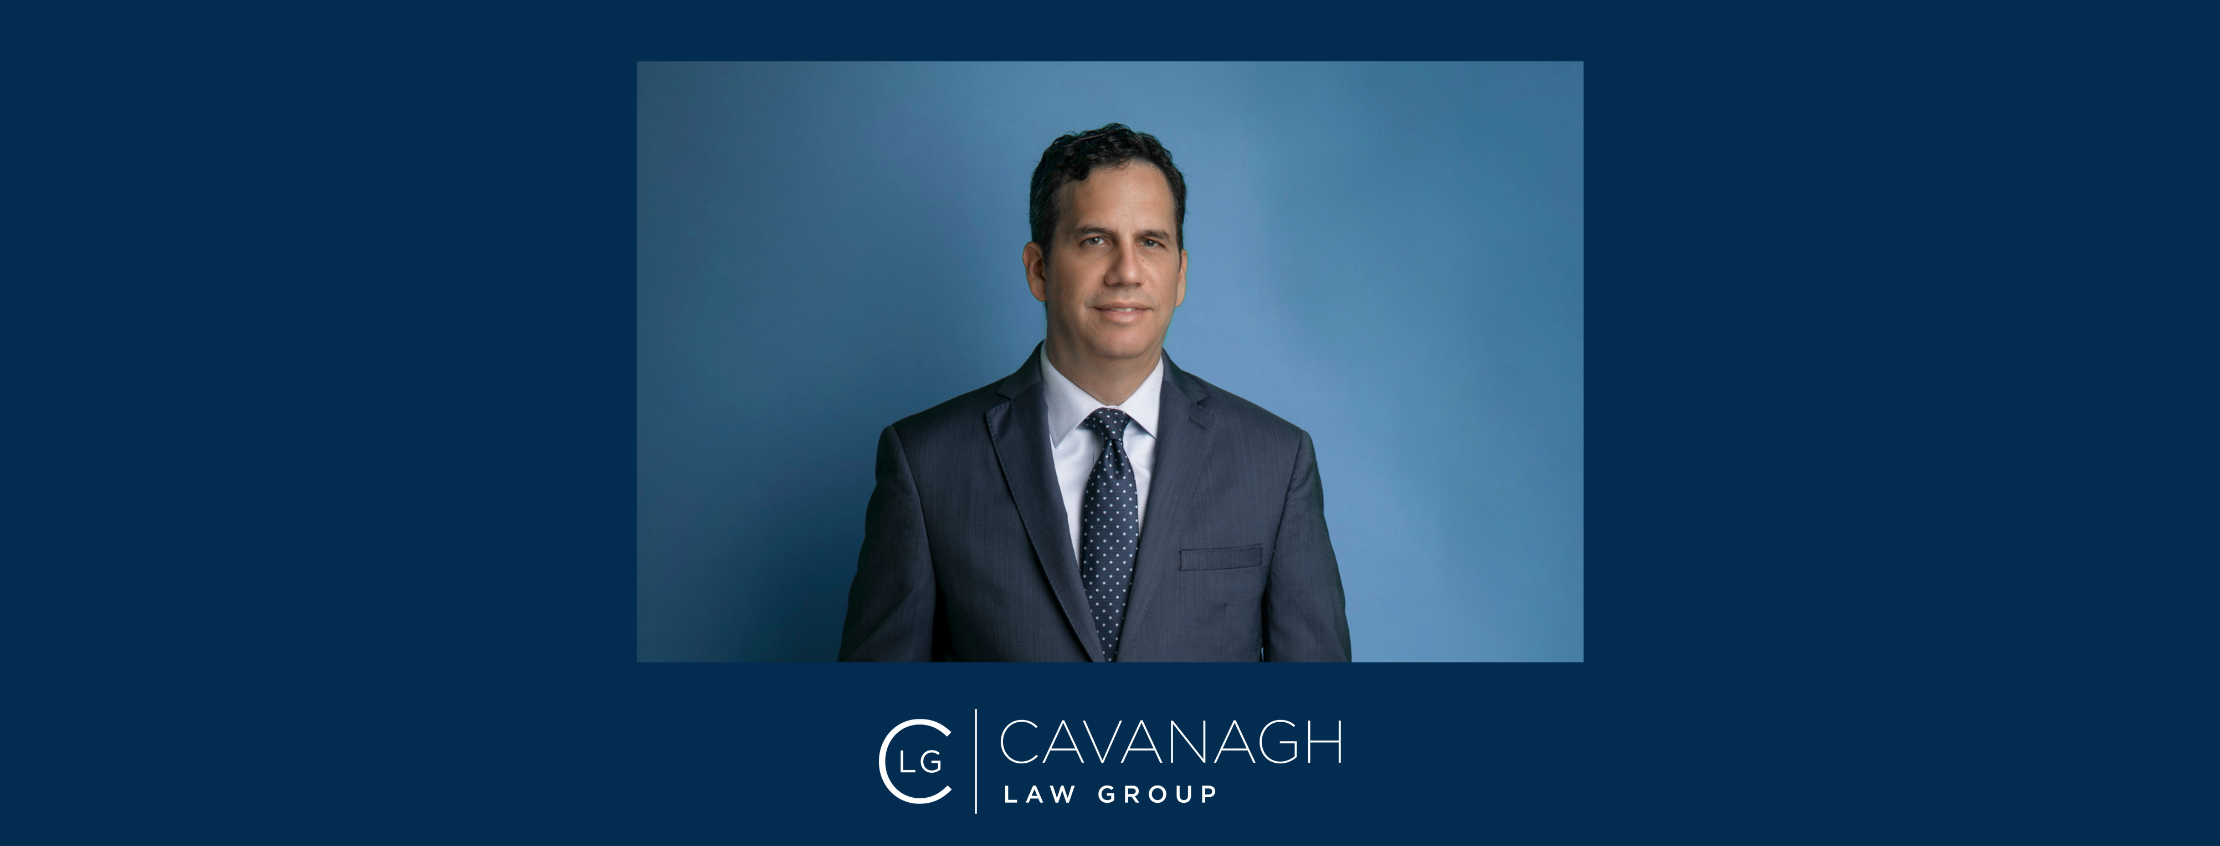 GET TO KNOW YOU: MEET CAVANAGH LAW GROUP PARTNER JASON KROOT